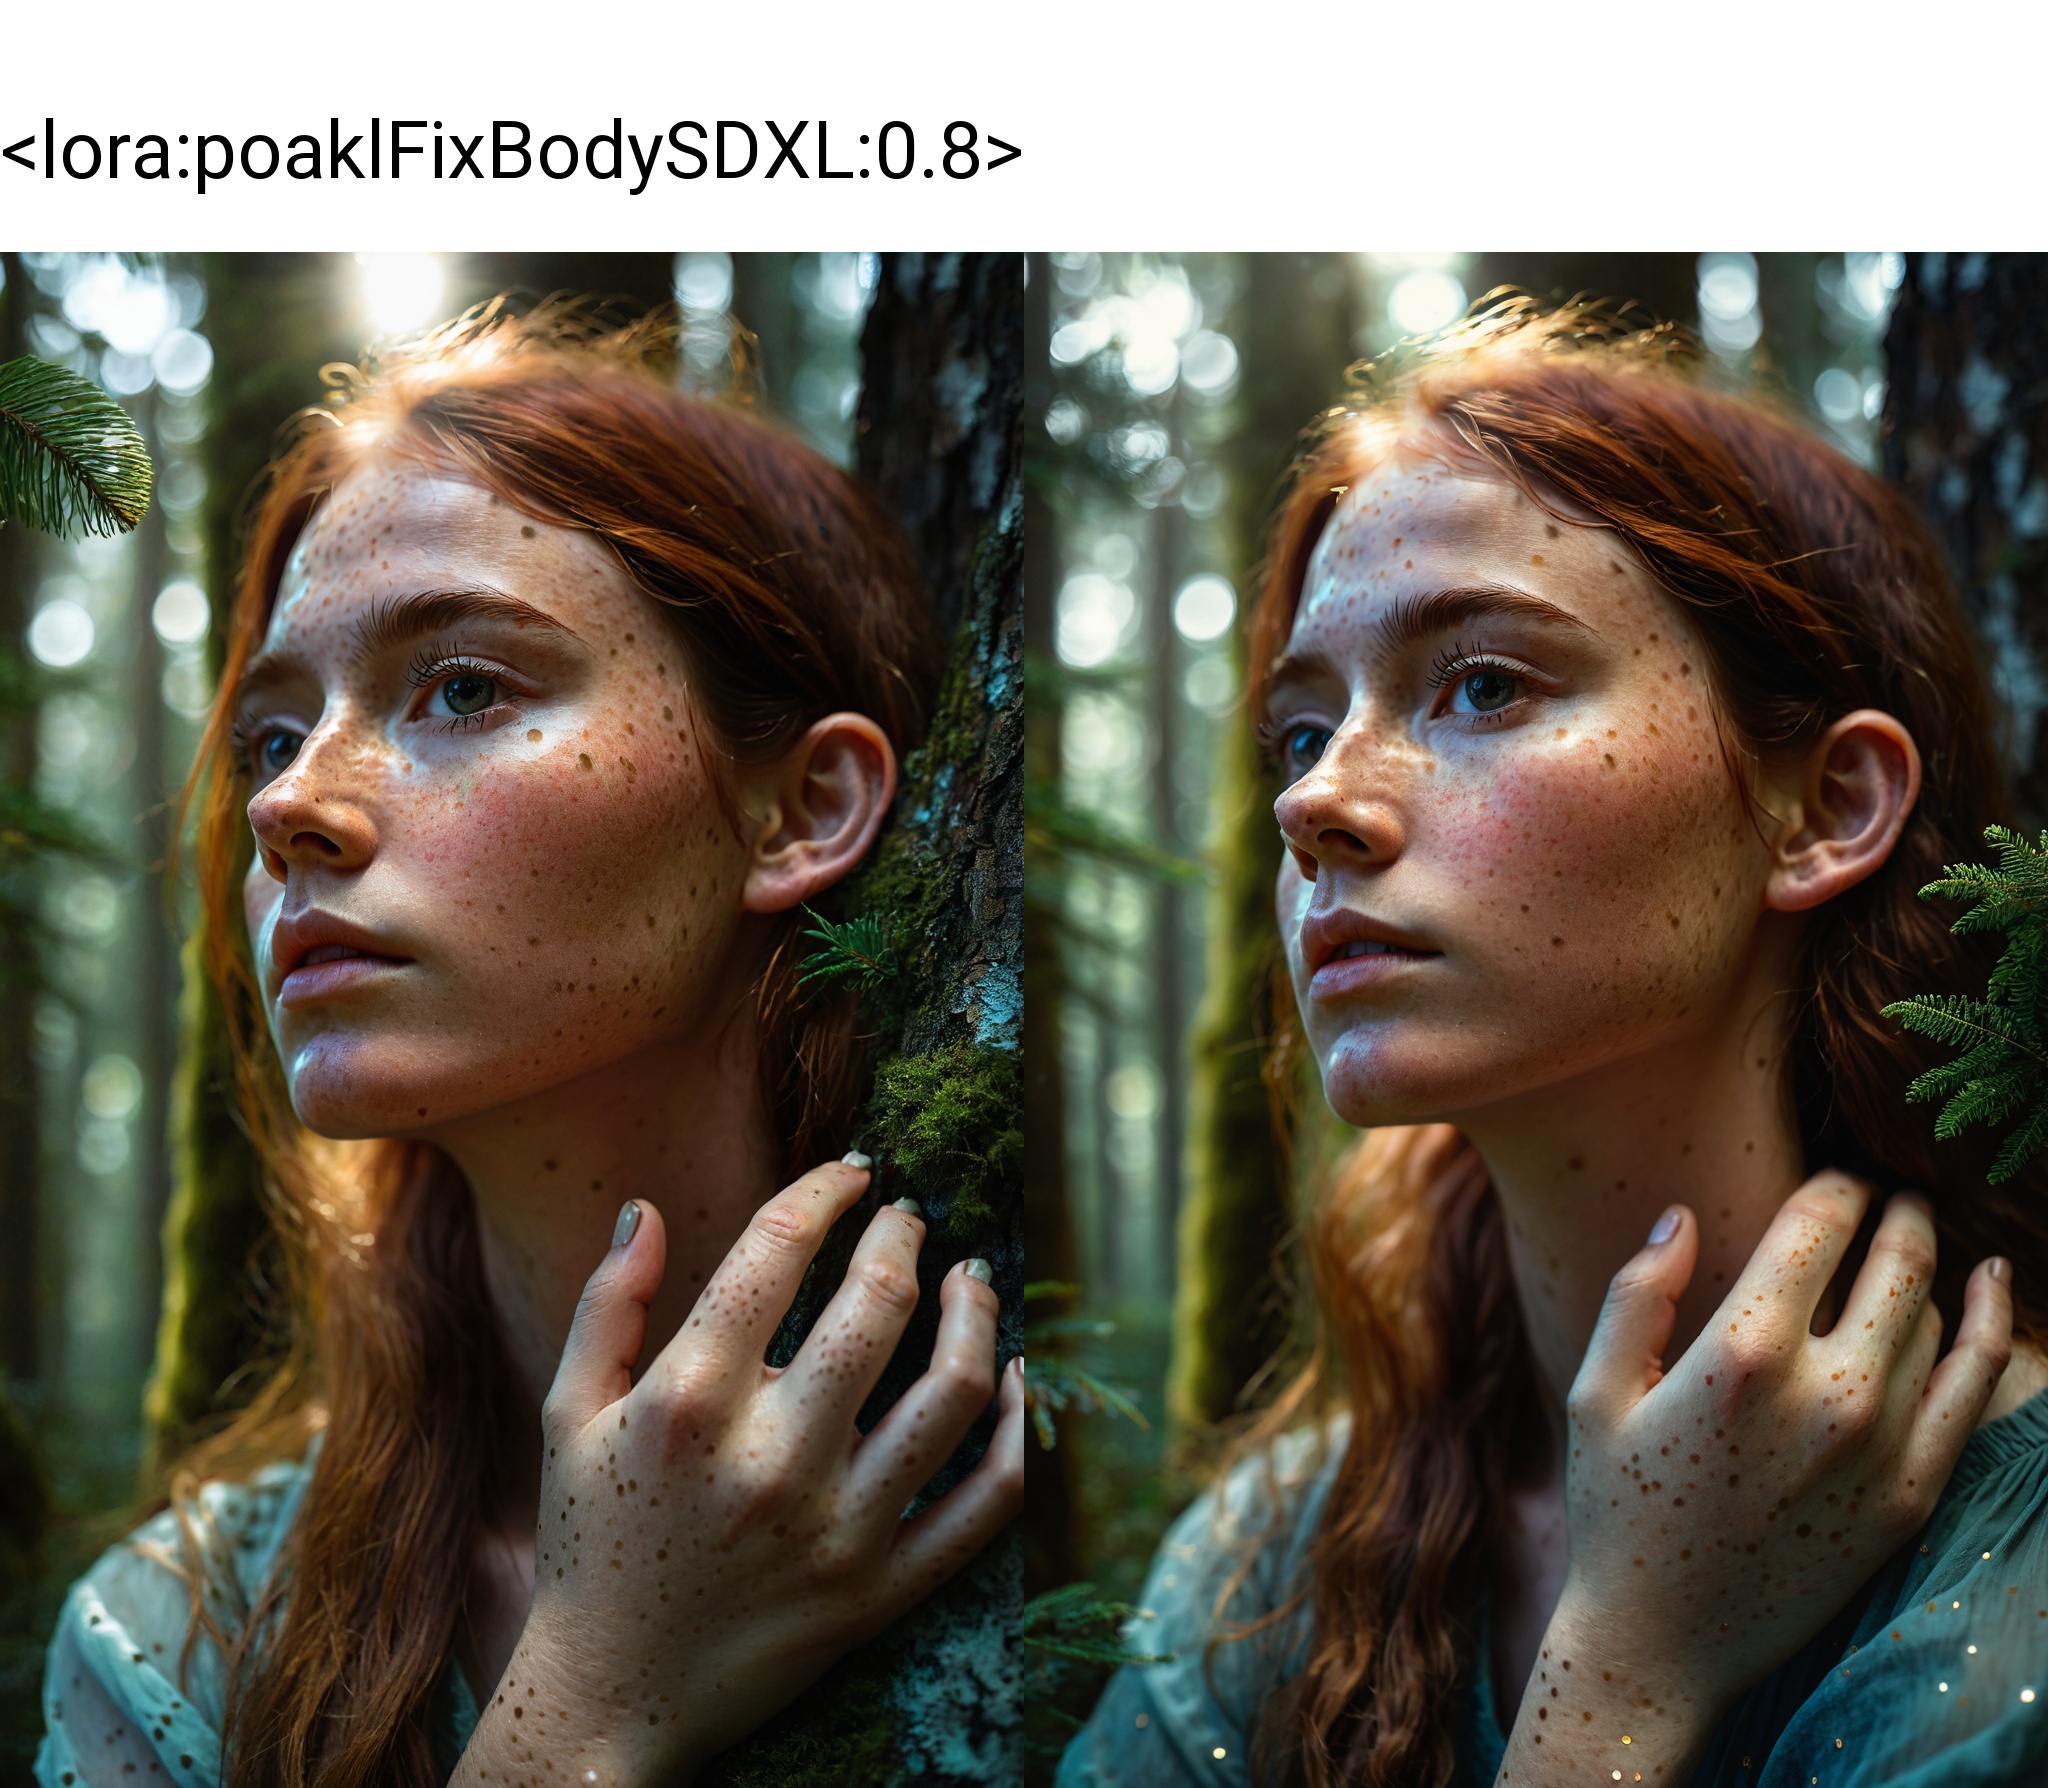 hands on face,hyperrealistic ******* portrait of a young woman in the forest,magnificent,celestial,ethereal,painterly,epic,magical,fantasy art,dreamy,chiaroscuro,atmospheric lighting,freckles,skin pores,pores,velus hair,macro,extreme details,((poakl)),<lora:poaklFixBodySDXL:0.8>,